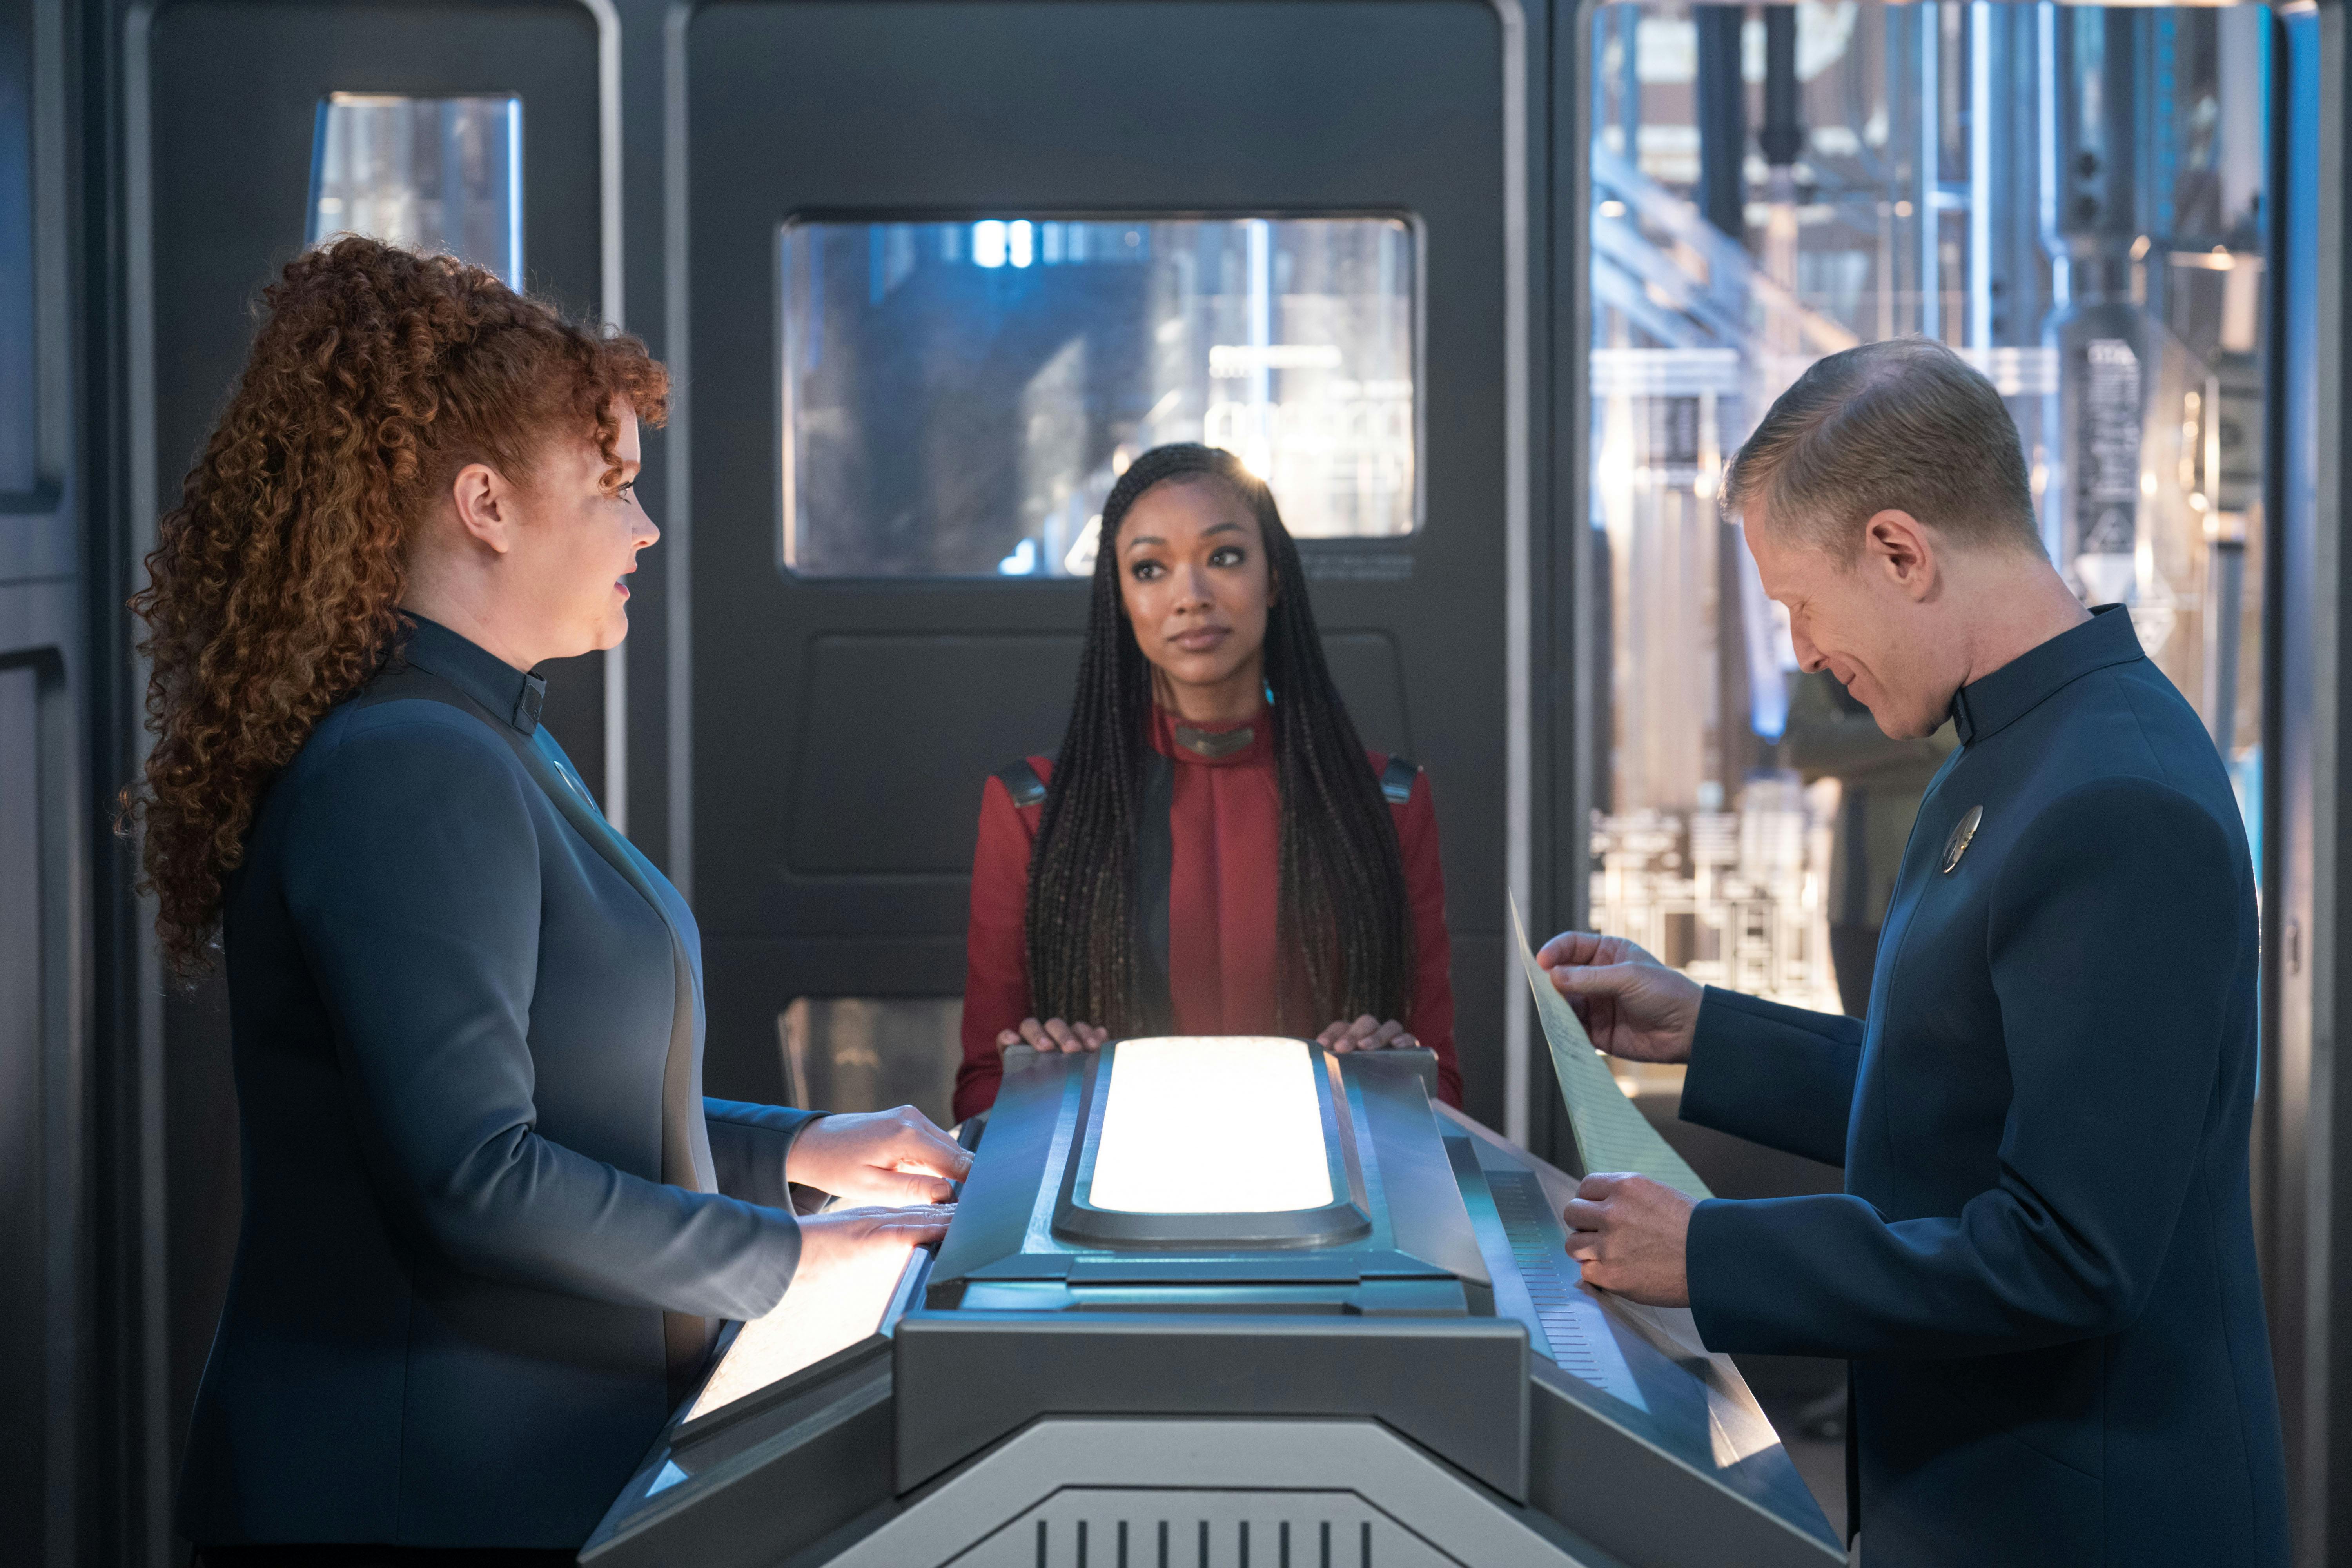 Burnham looks over at Tilly as Stamets analyzes a piece of paper with a list of names in 'Whistlespeak'